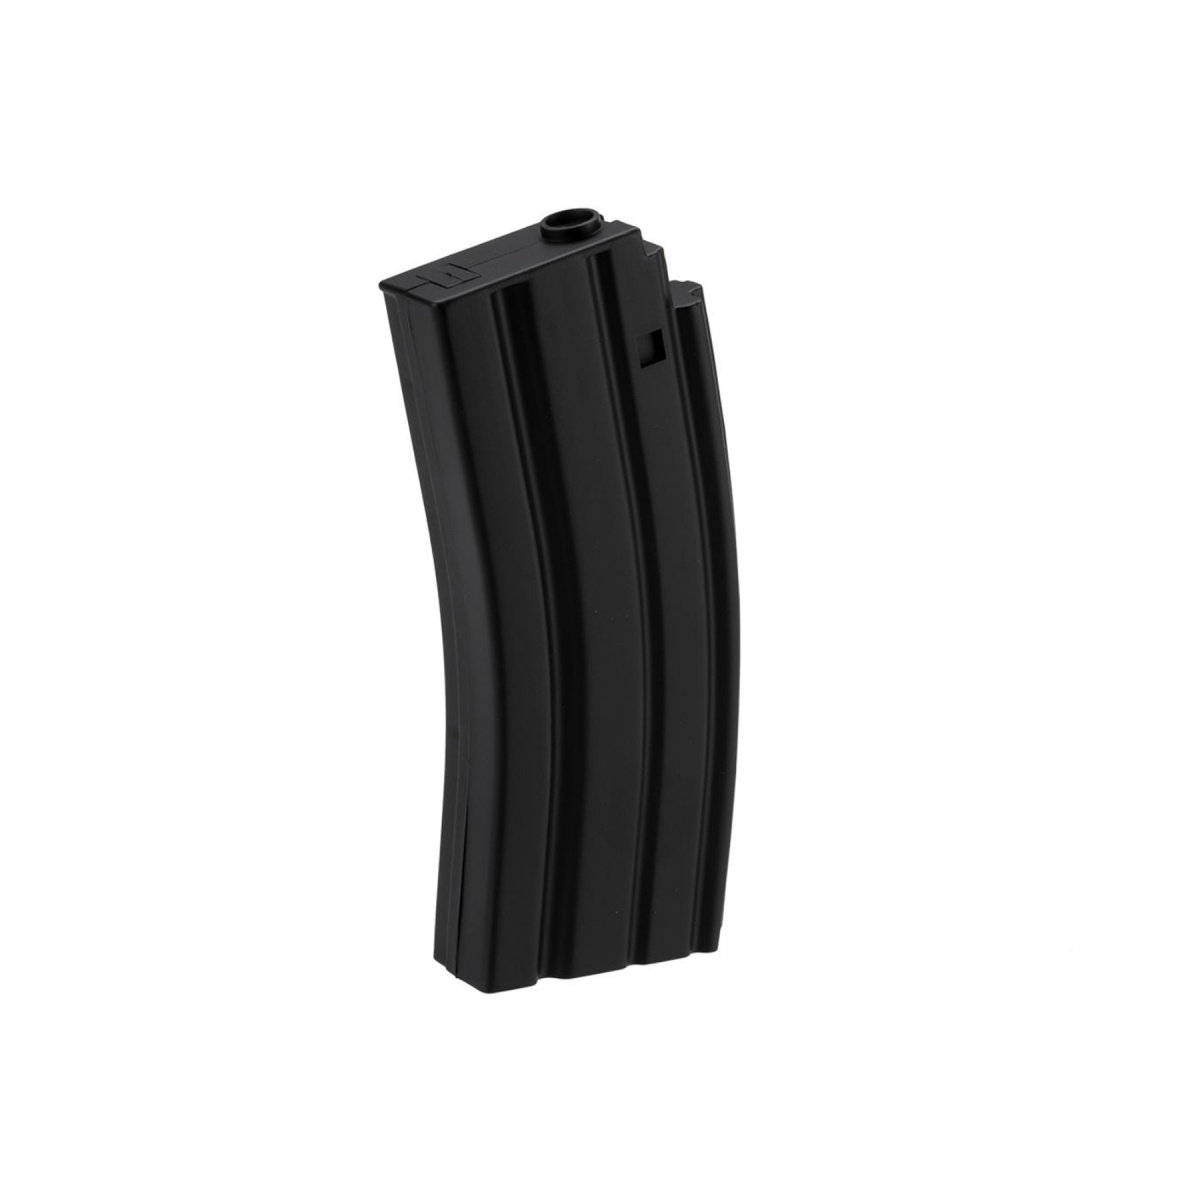 Magazine Clip for Double Eagle M83 Airsoft Gun for sale online 